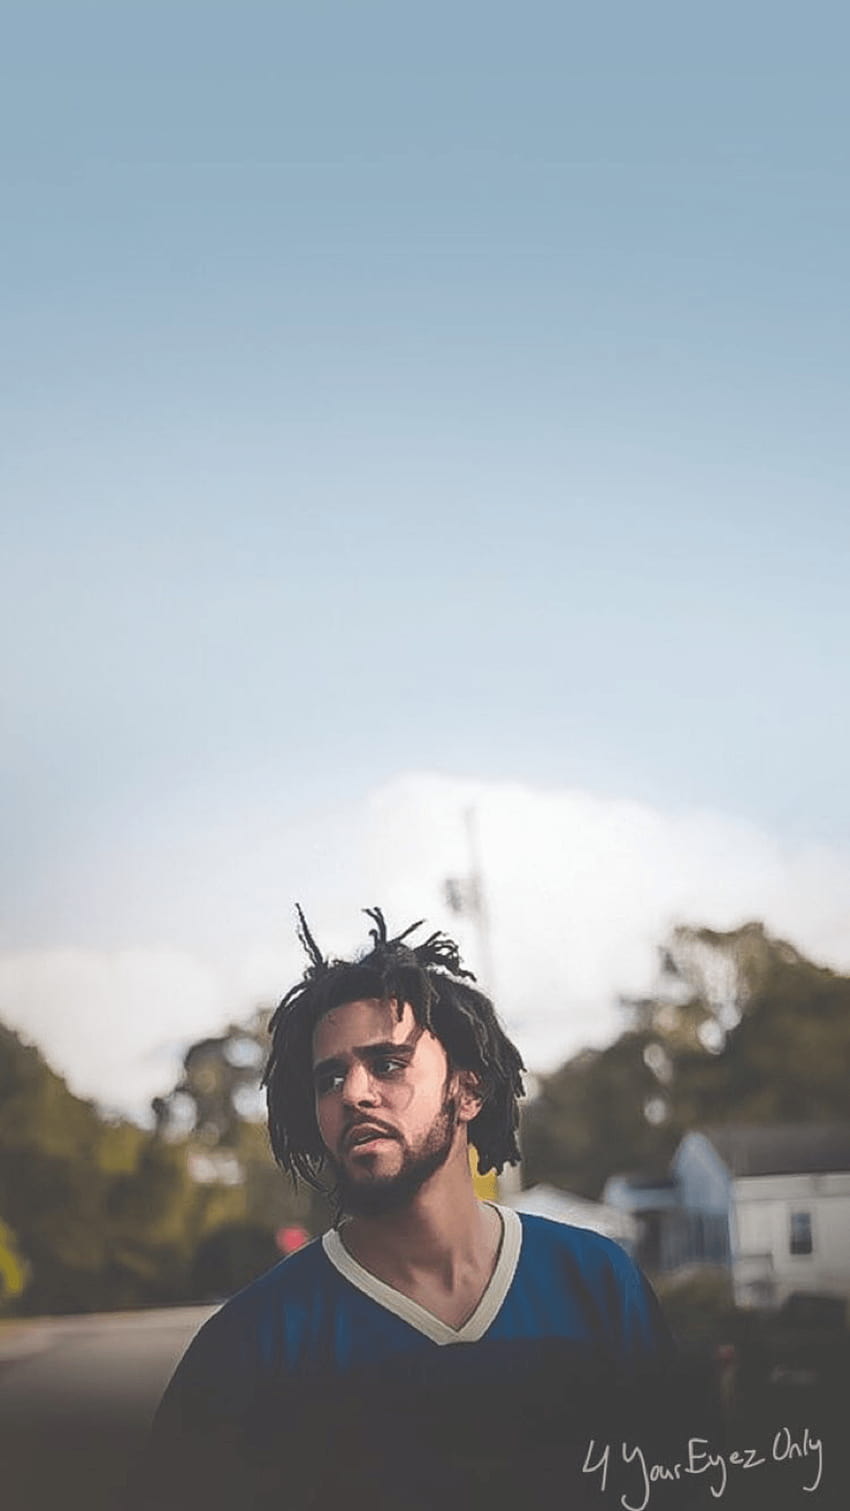 J Cole iPhone 11 Wallpapers  Wallpaper Cave